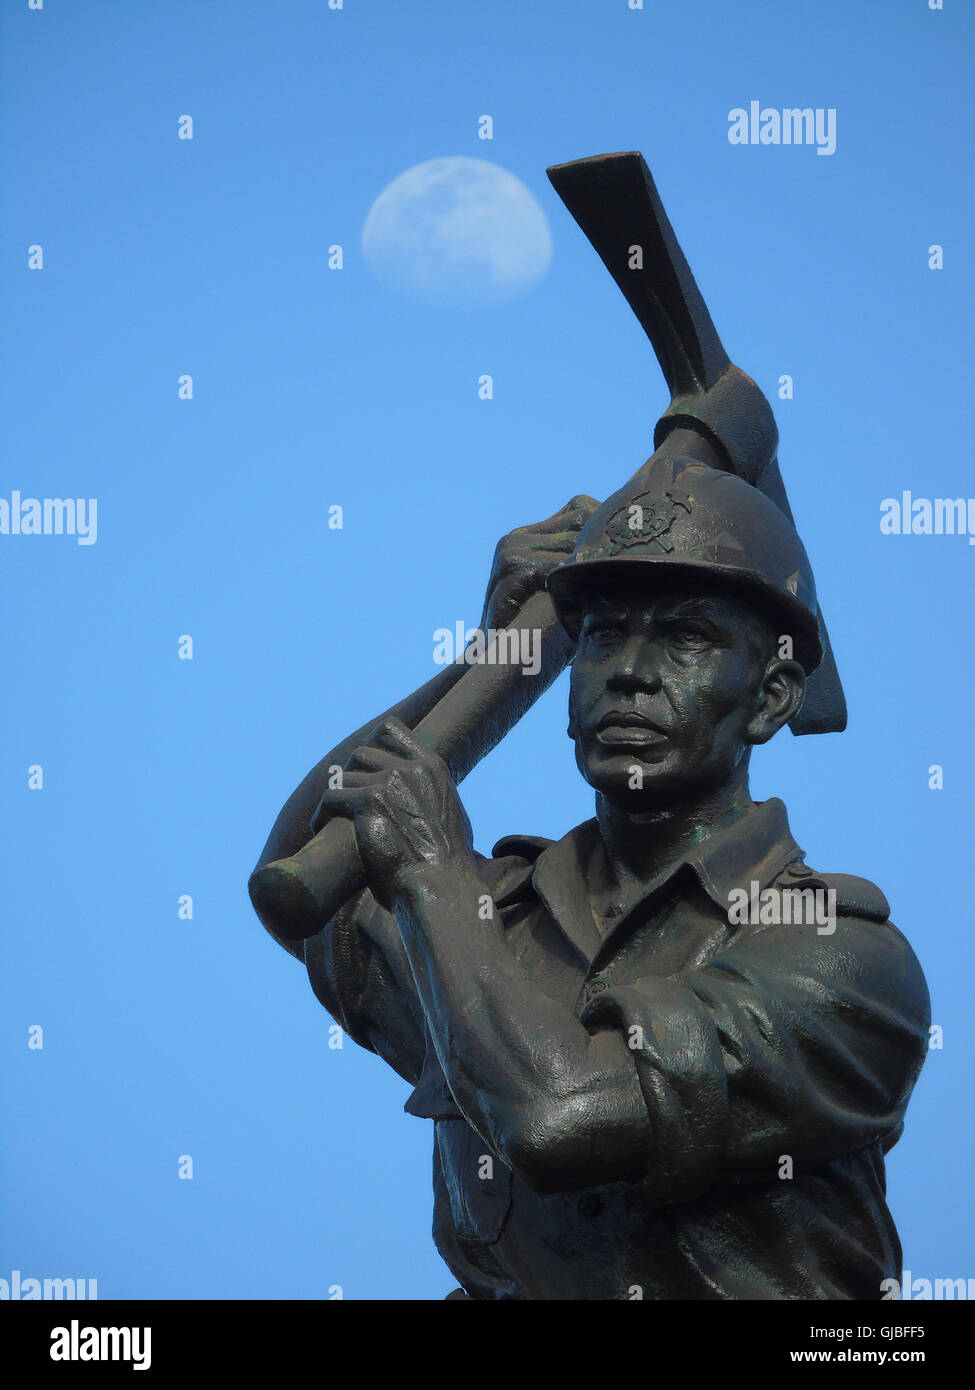 Miner statue with moon background on August 14, 2016 in Bintan island, Indonesia. Photo by Yuli Seperi Stock Photo